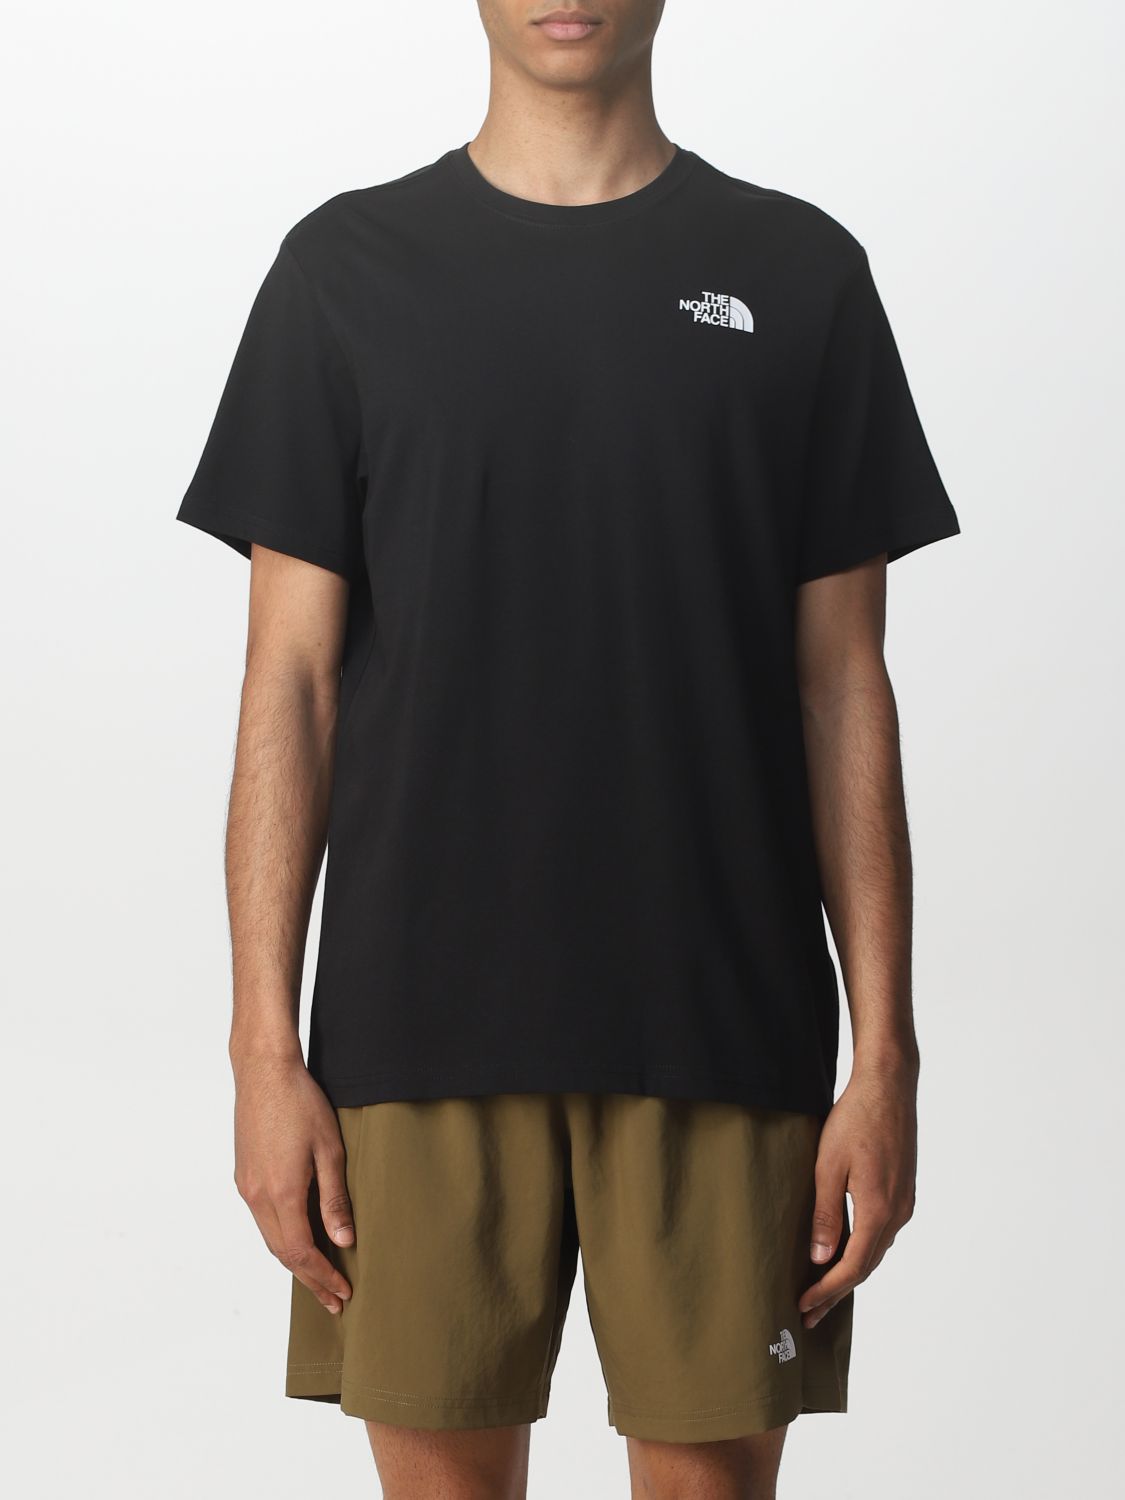 The North Face T-shirt Men In Black | ModeSens